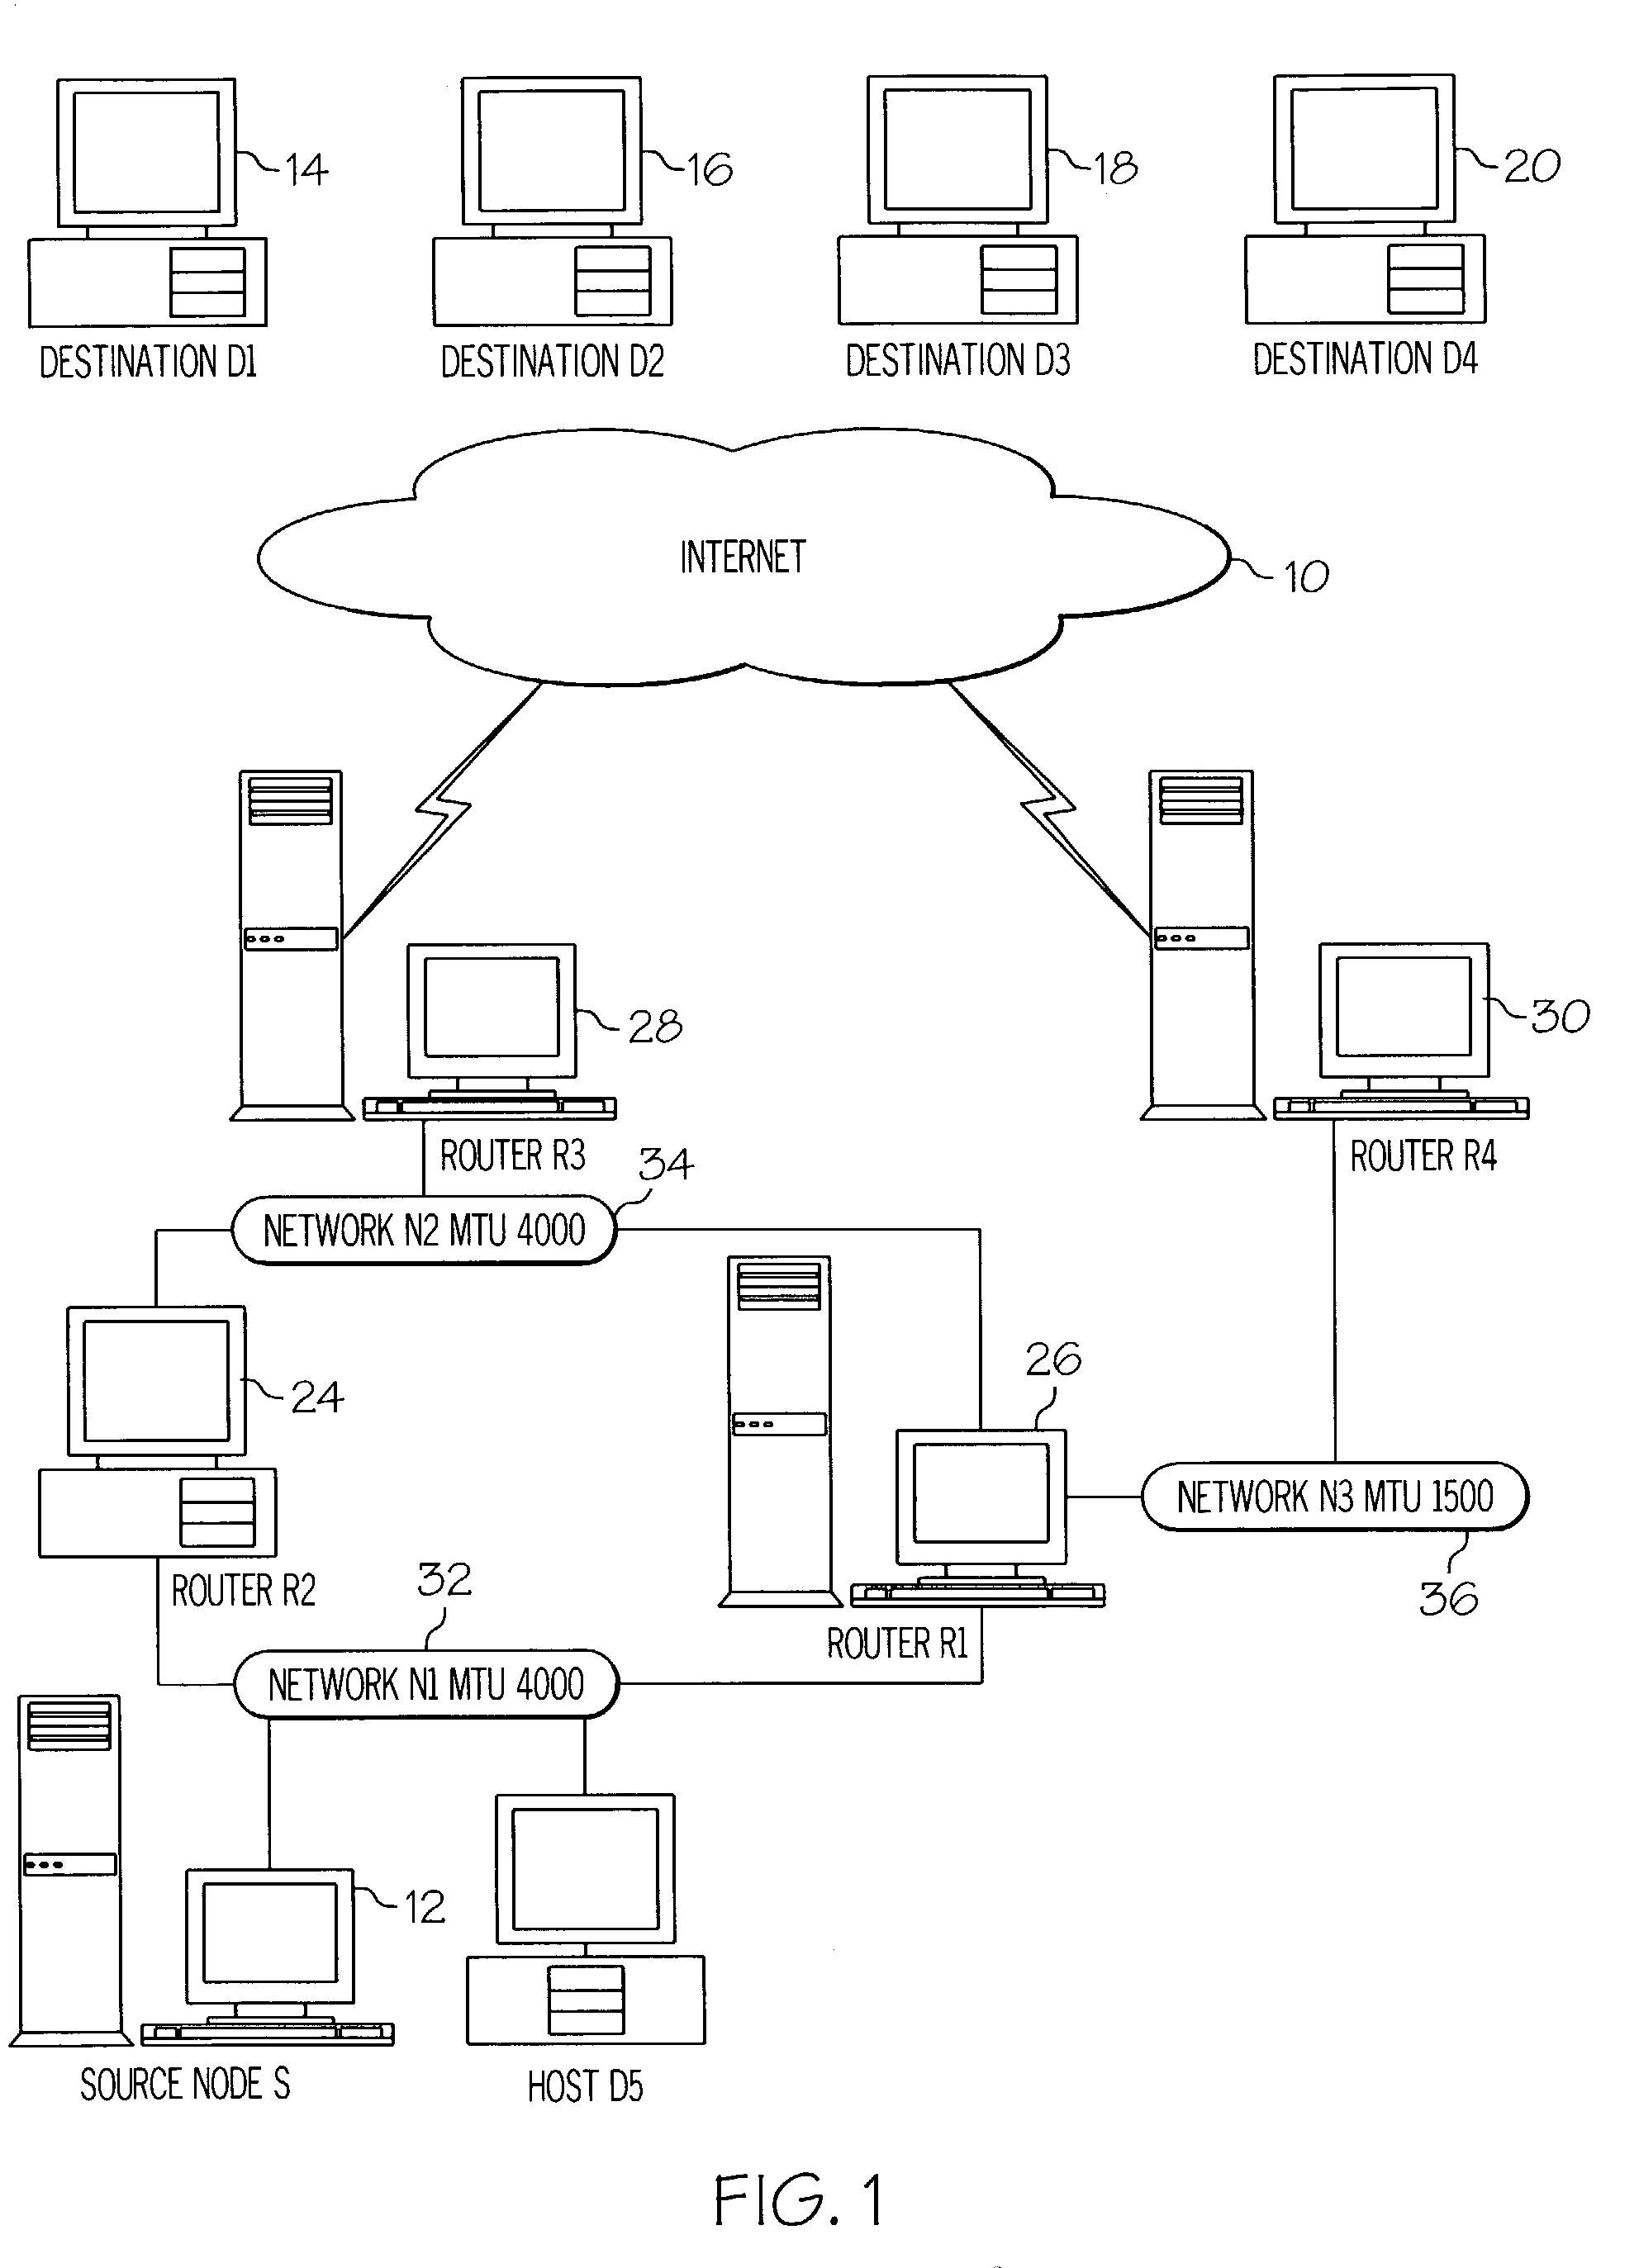 Utility based filtering mechanism for PMTU probing